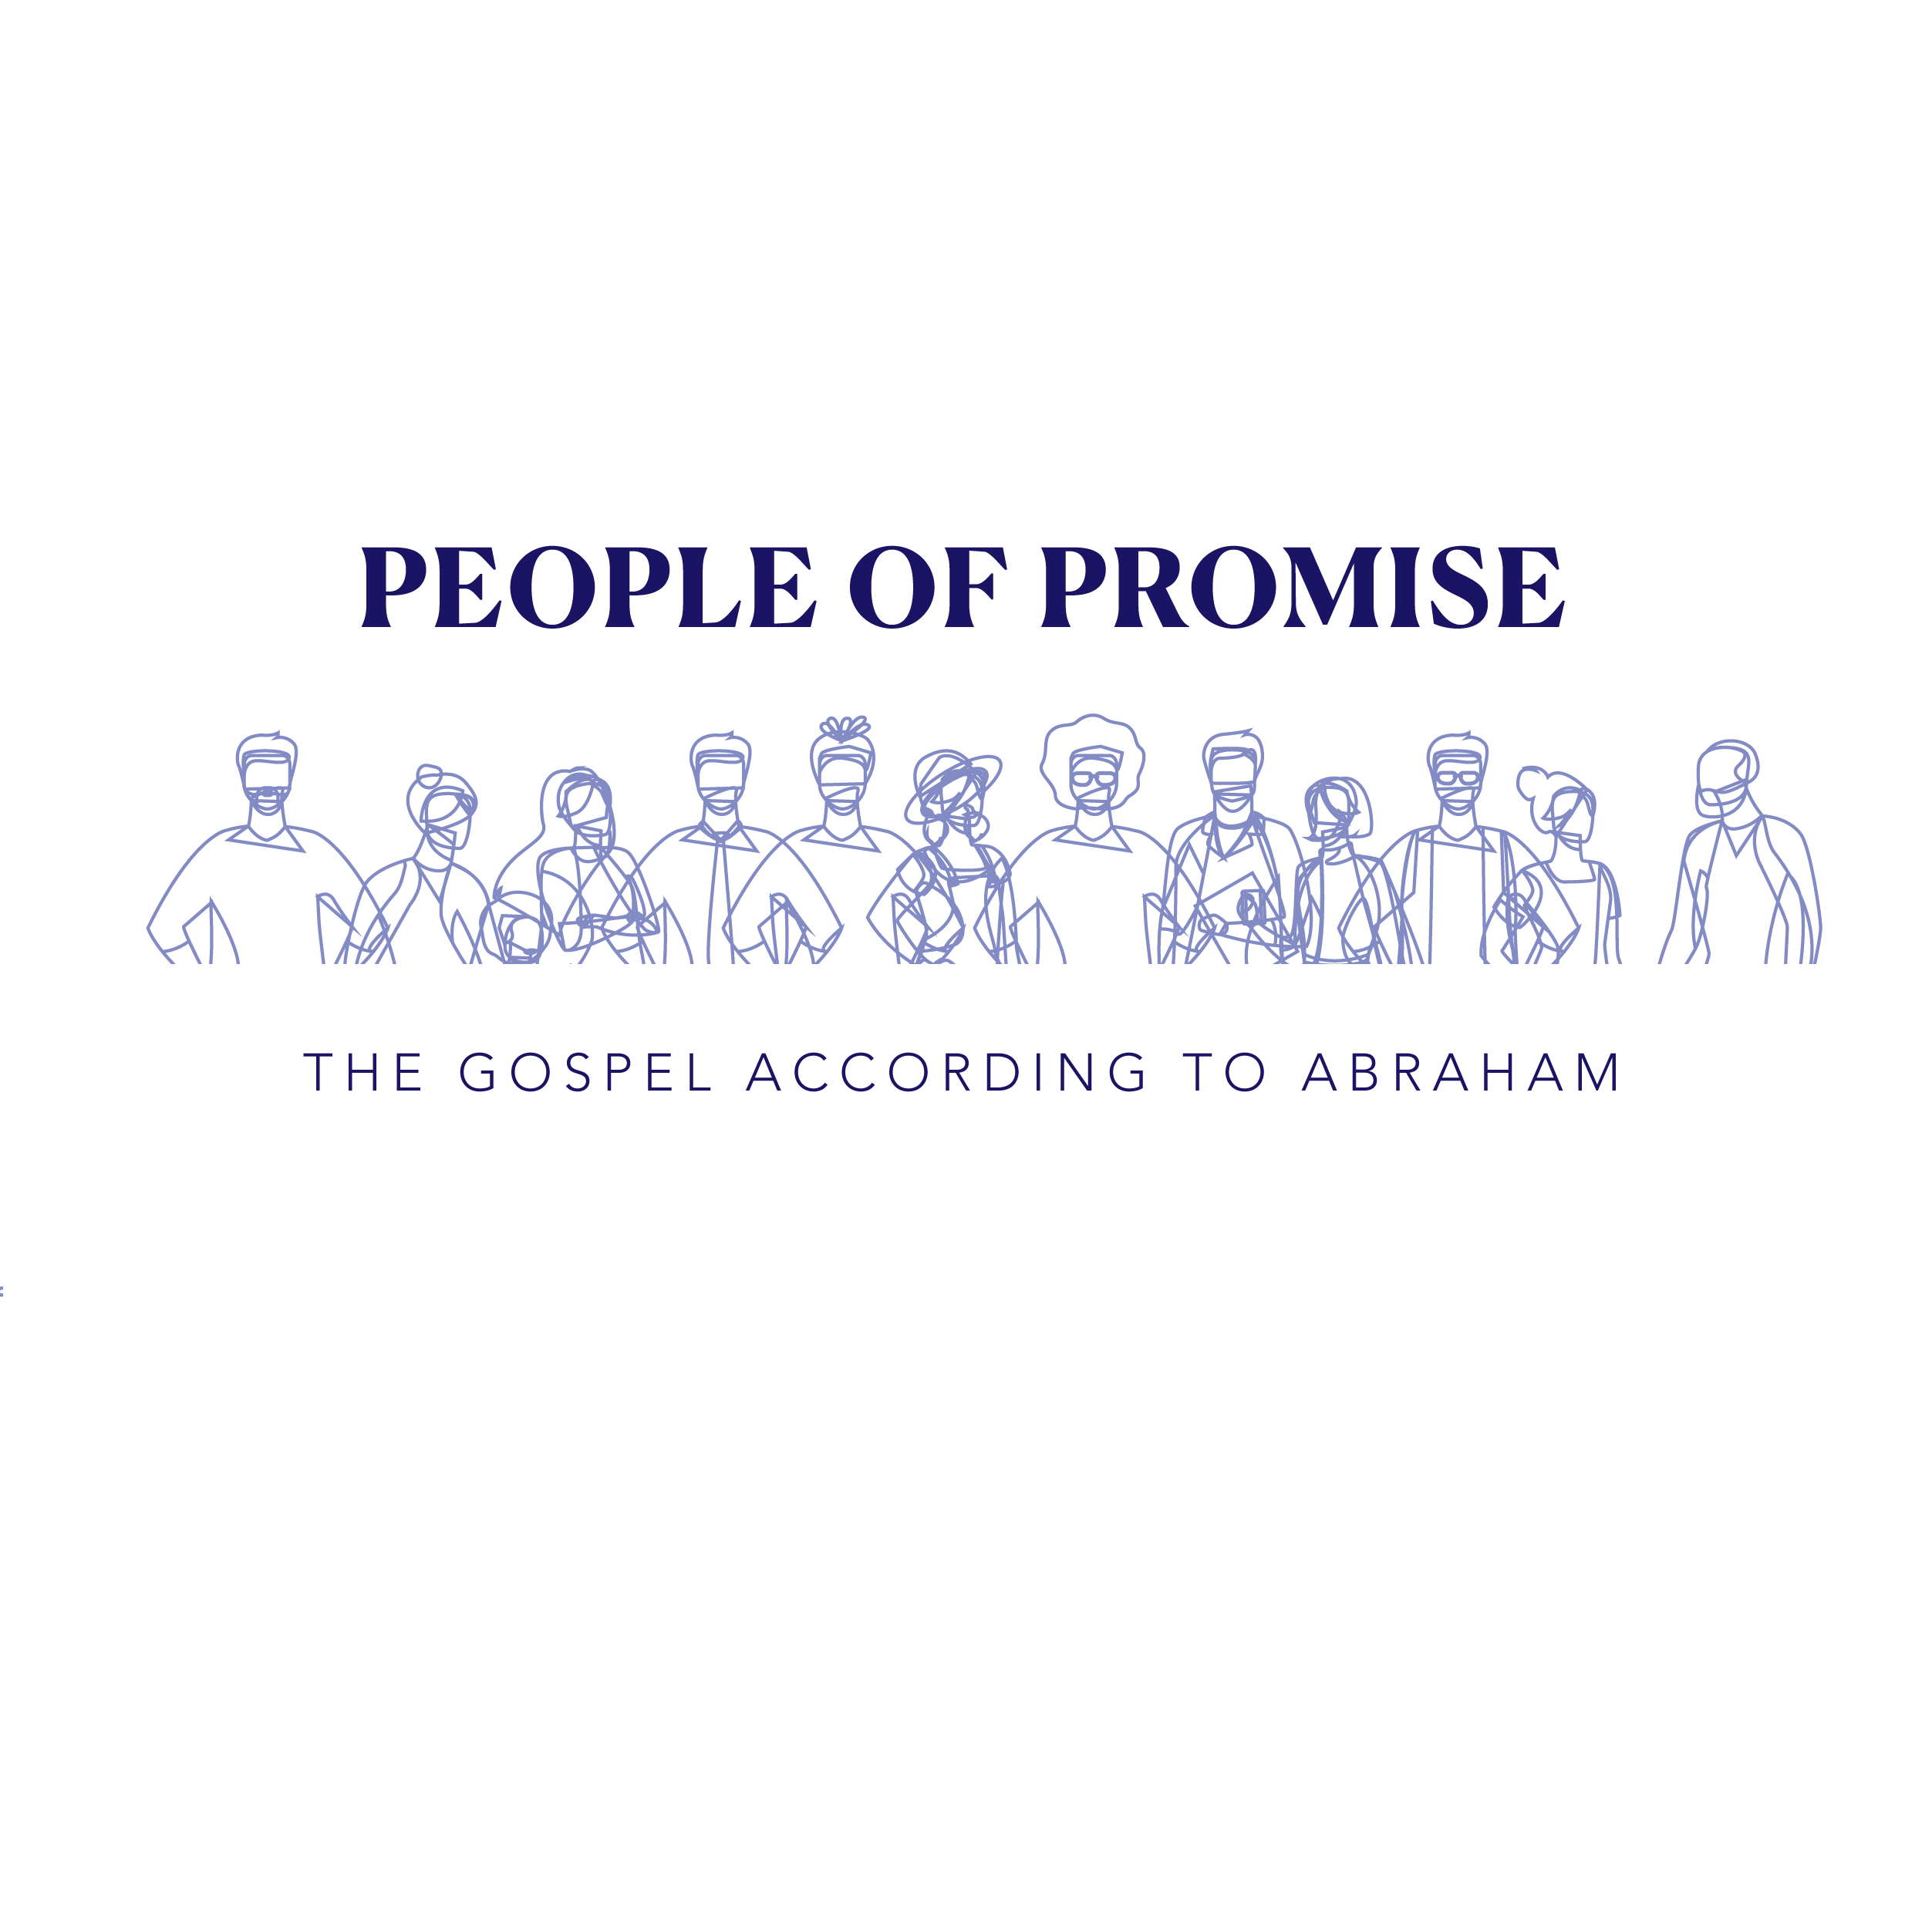 People of Promise: Abraham’s City